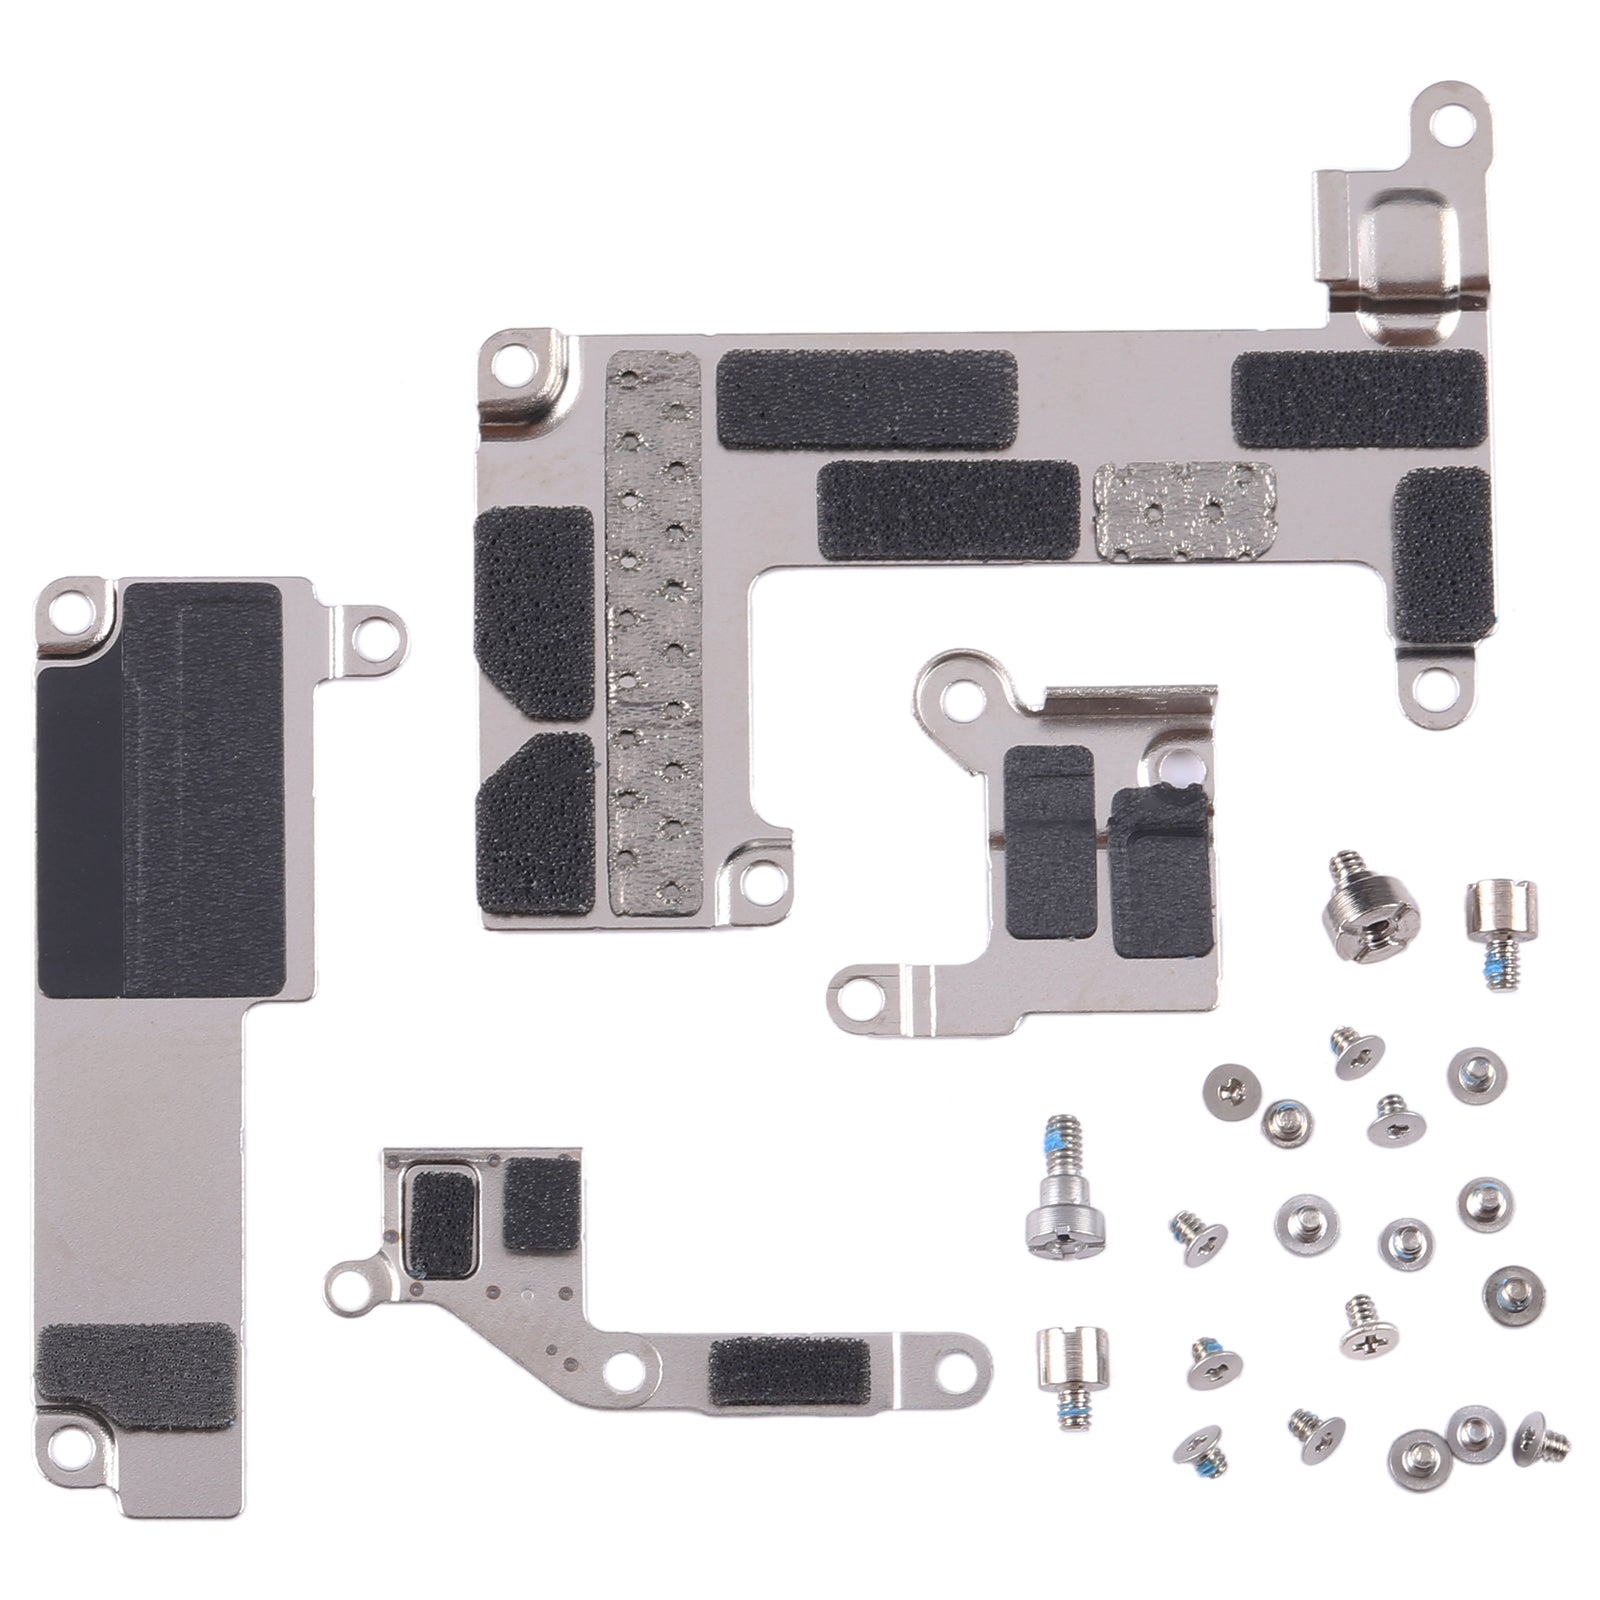 Pack of Internal Metal Parts iPhone 13 Pro Max